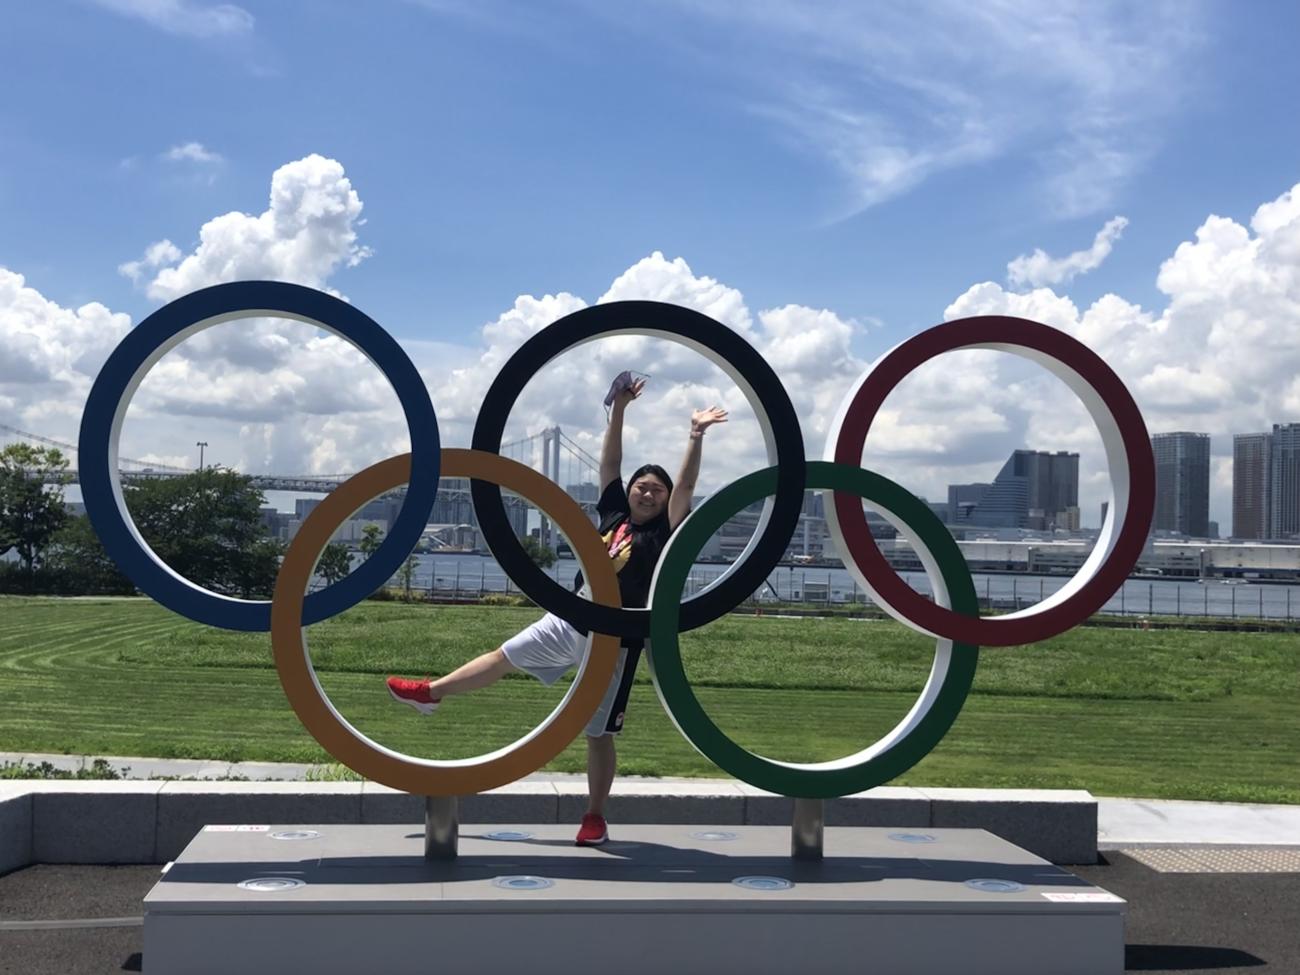 Chiaki Inoue, G'06 Therapeutic Recreation / Child Life, Mission Team staff for Team Canada for both Olympics and Paralympics.